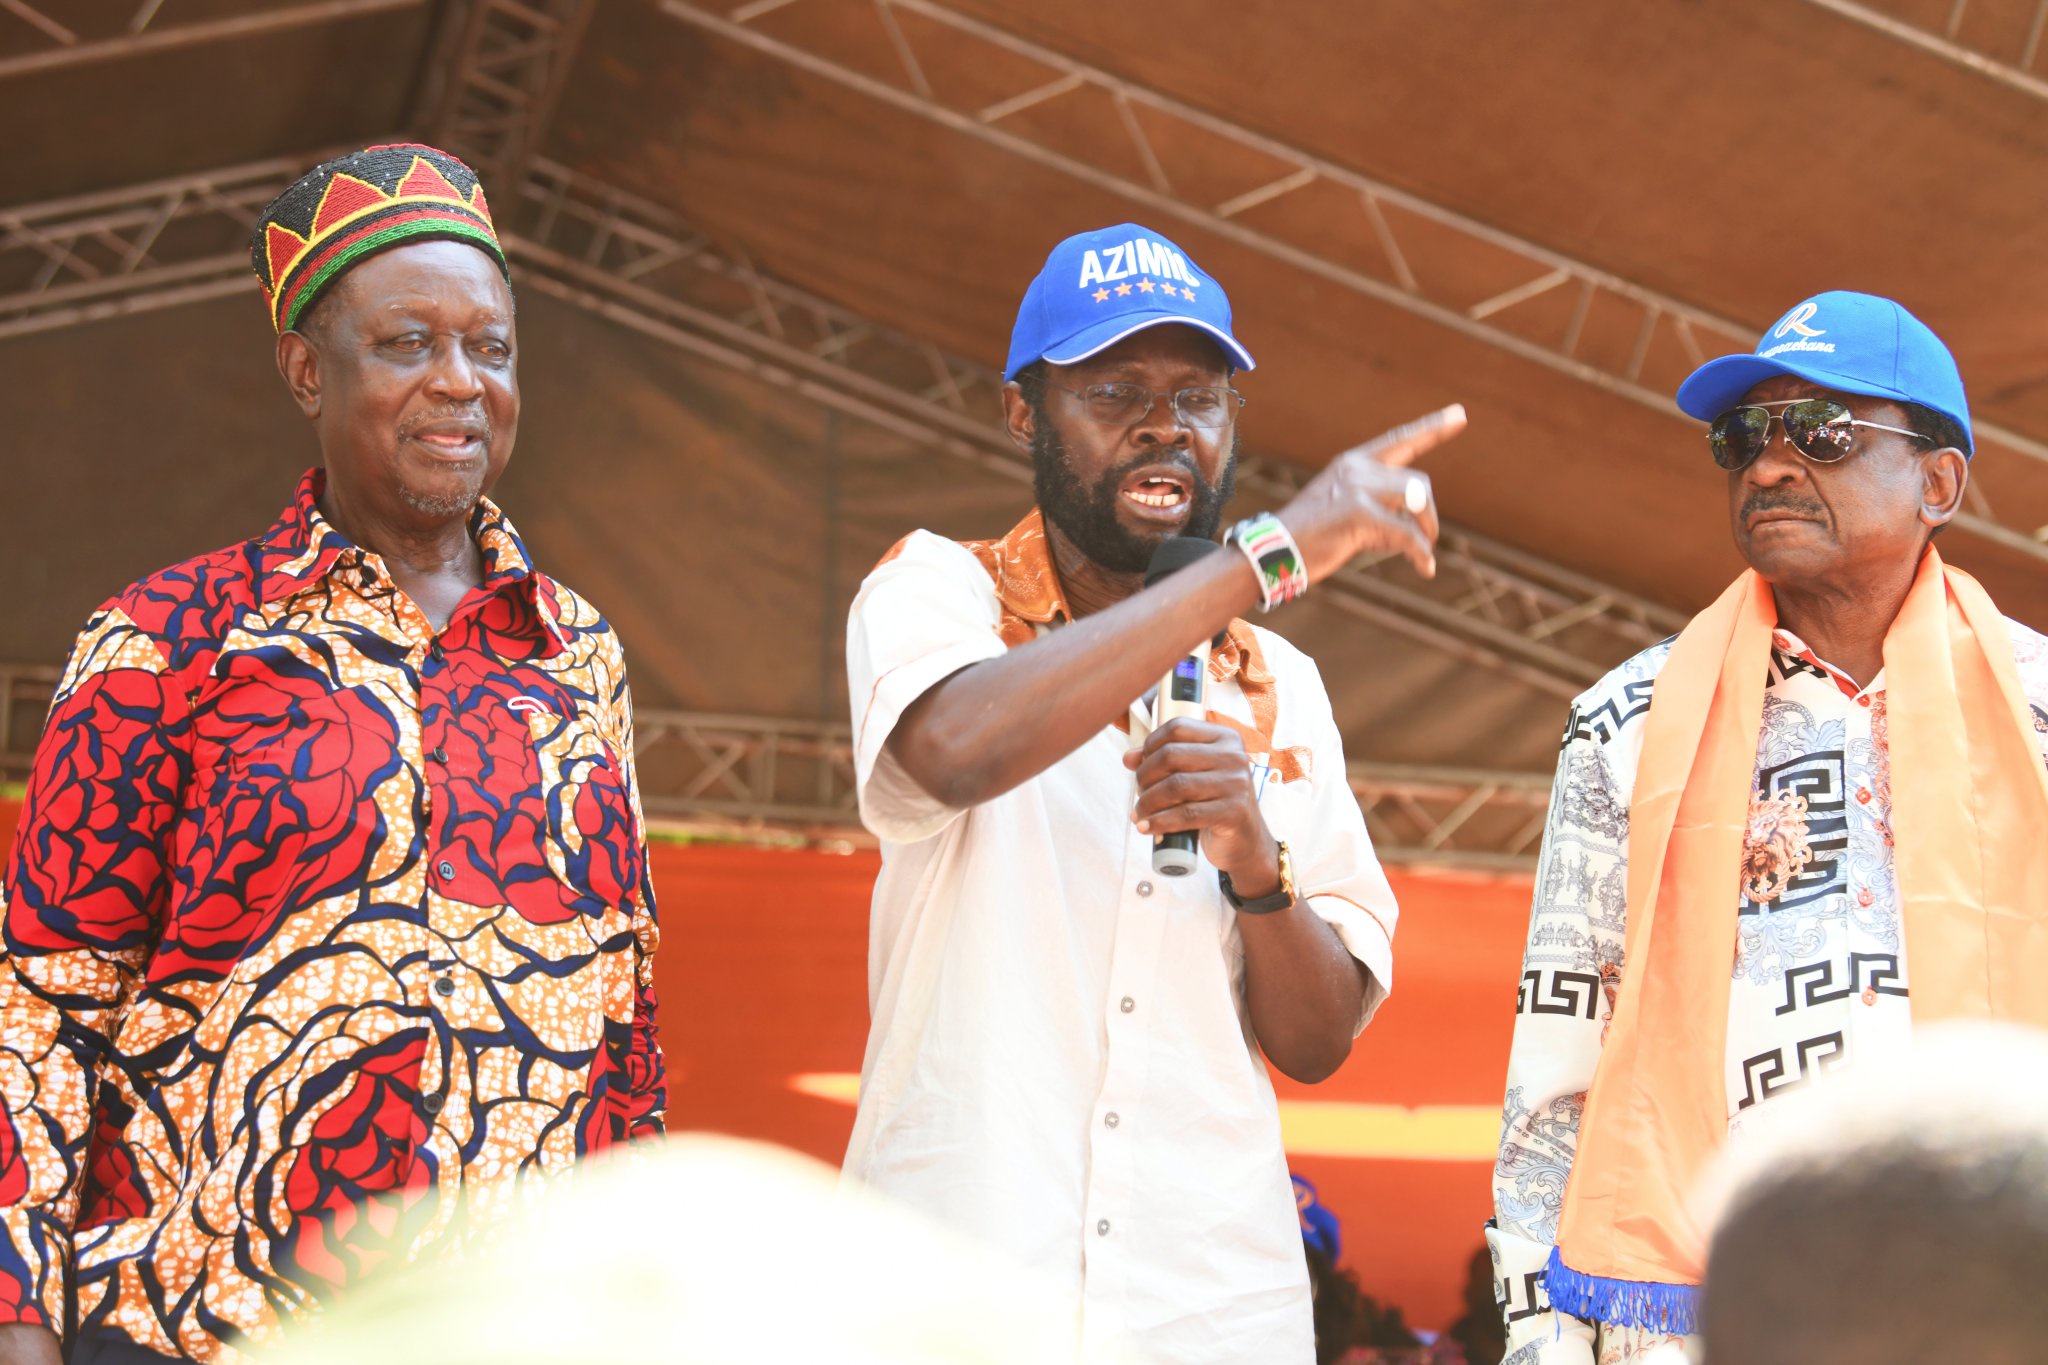 Tension in ODM as Kisumu Governor Prof. ANYANG NYONG'O demands a direct  ticket from RAILA ODINGA – I'm one of your loyal supporters. | DAILY POST